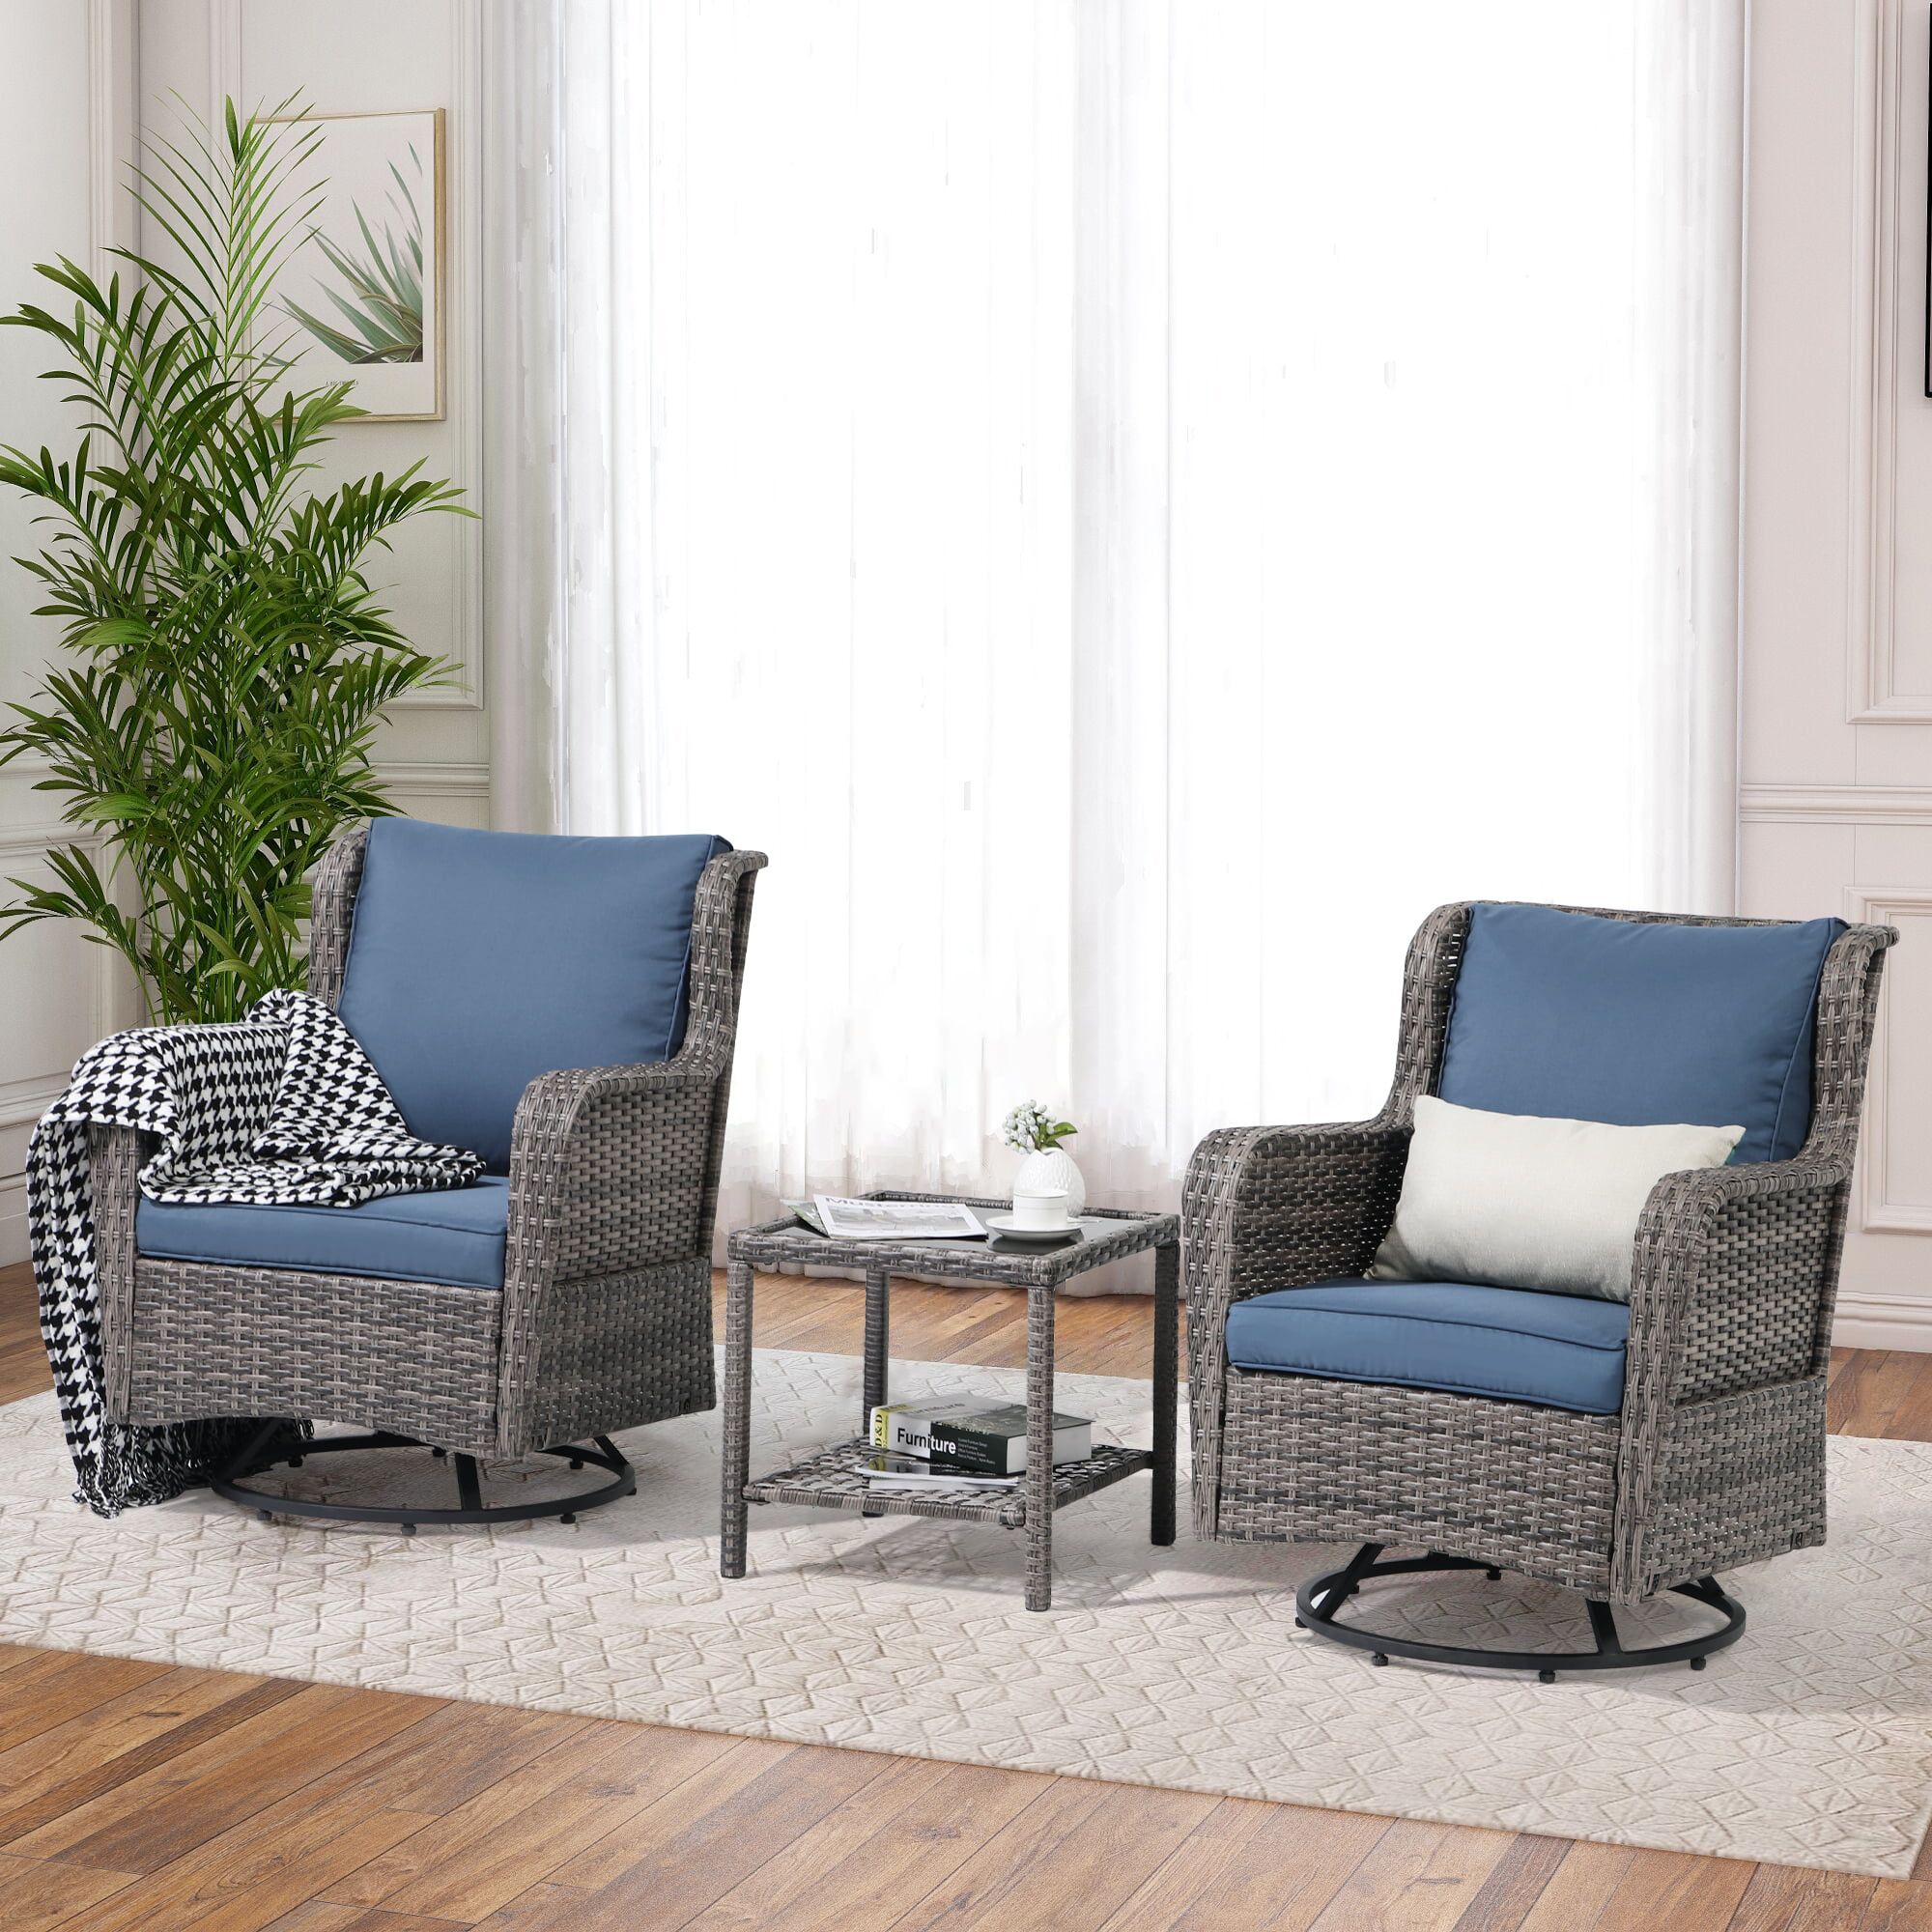 Joivi Patio Swivel Rocker Set, Outdoor Wicker Swivel Rocking Chairs With Side  Table, 3 Pieces All Weather Rattan Furniture Bistro Set With Thick  Cushions, Iron Frame, Navy Blue – Walmart Within Side Table Iron Frame Patio Furniture Set (View 9 of 15)